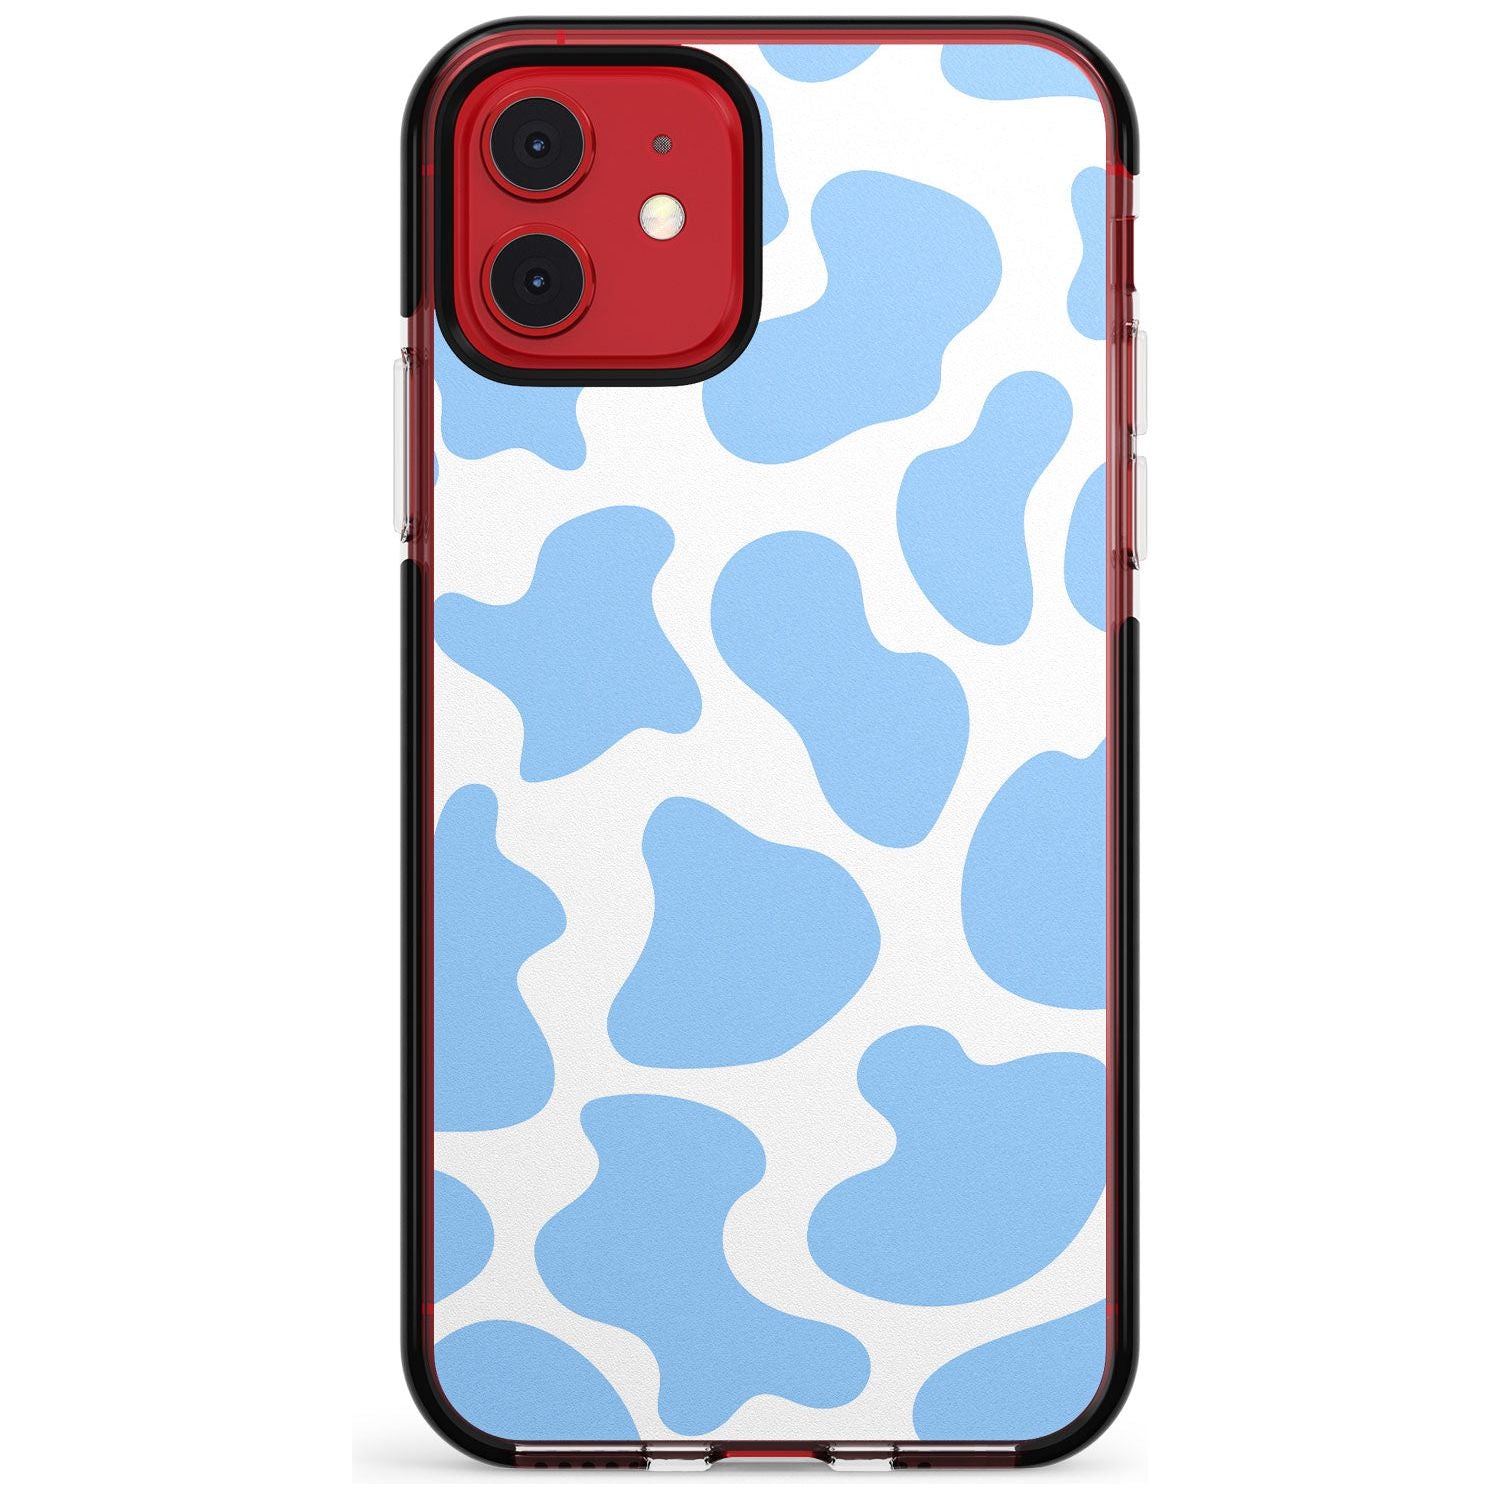 Blue and White Cow Print Black Impact Phone Case for iPhone 11 Pro Max